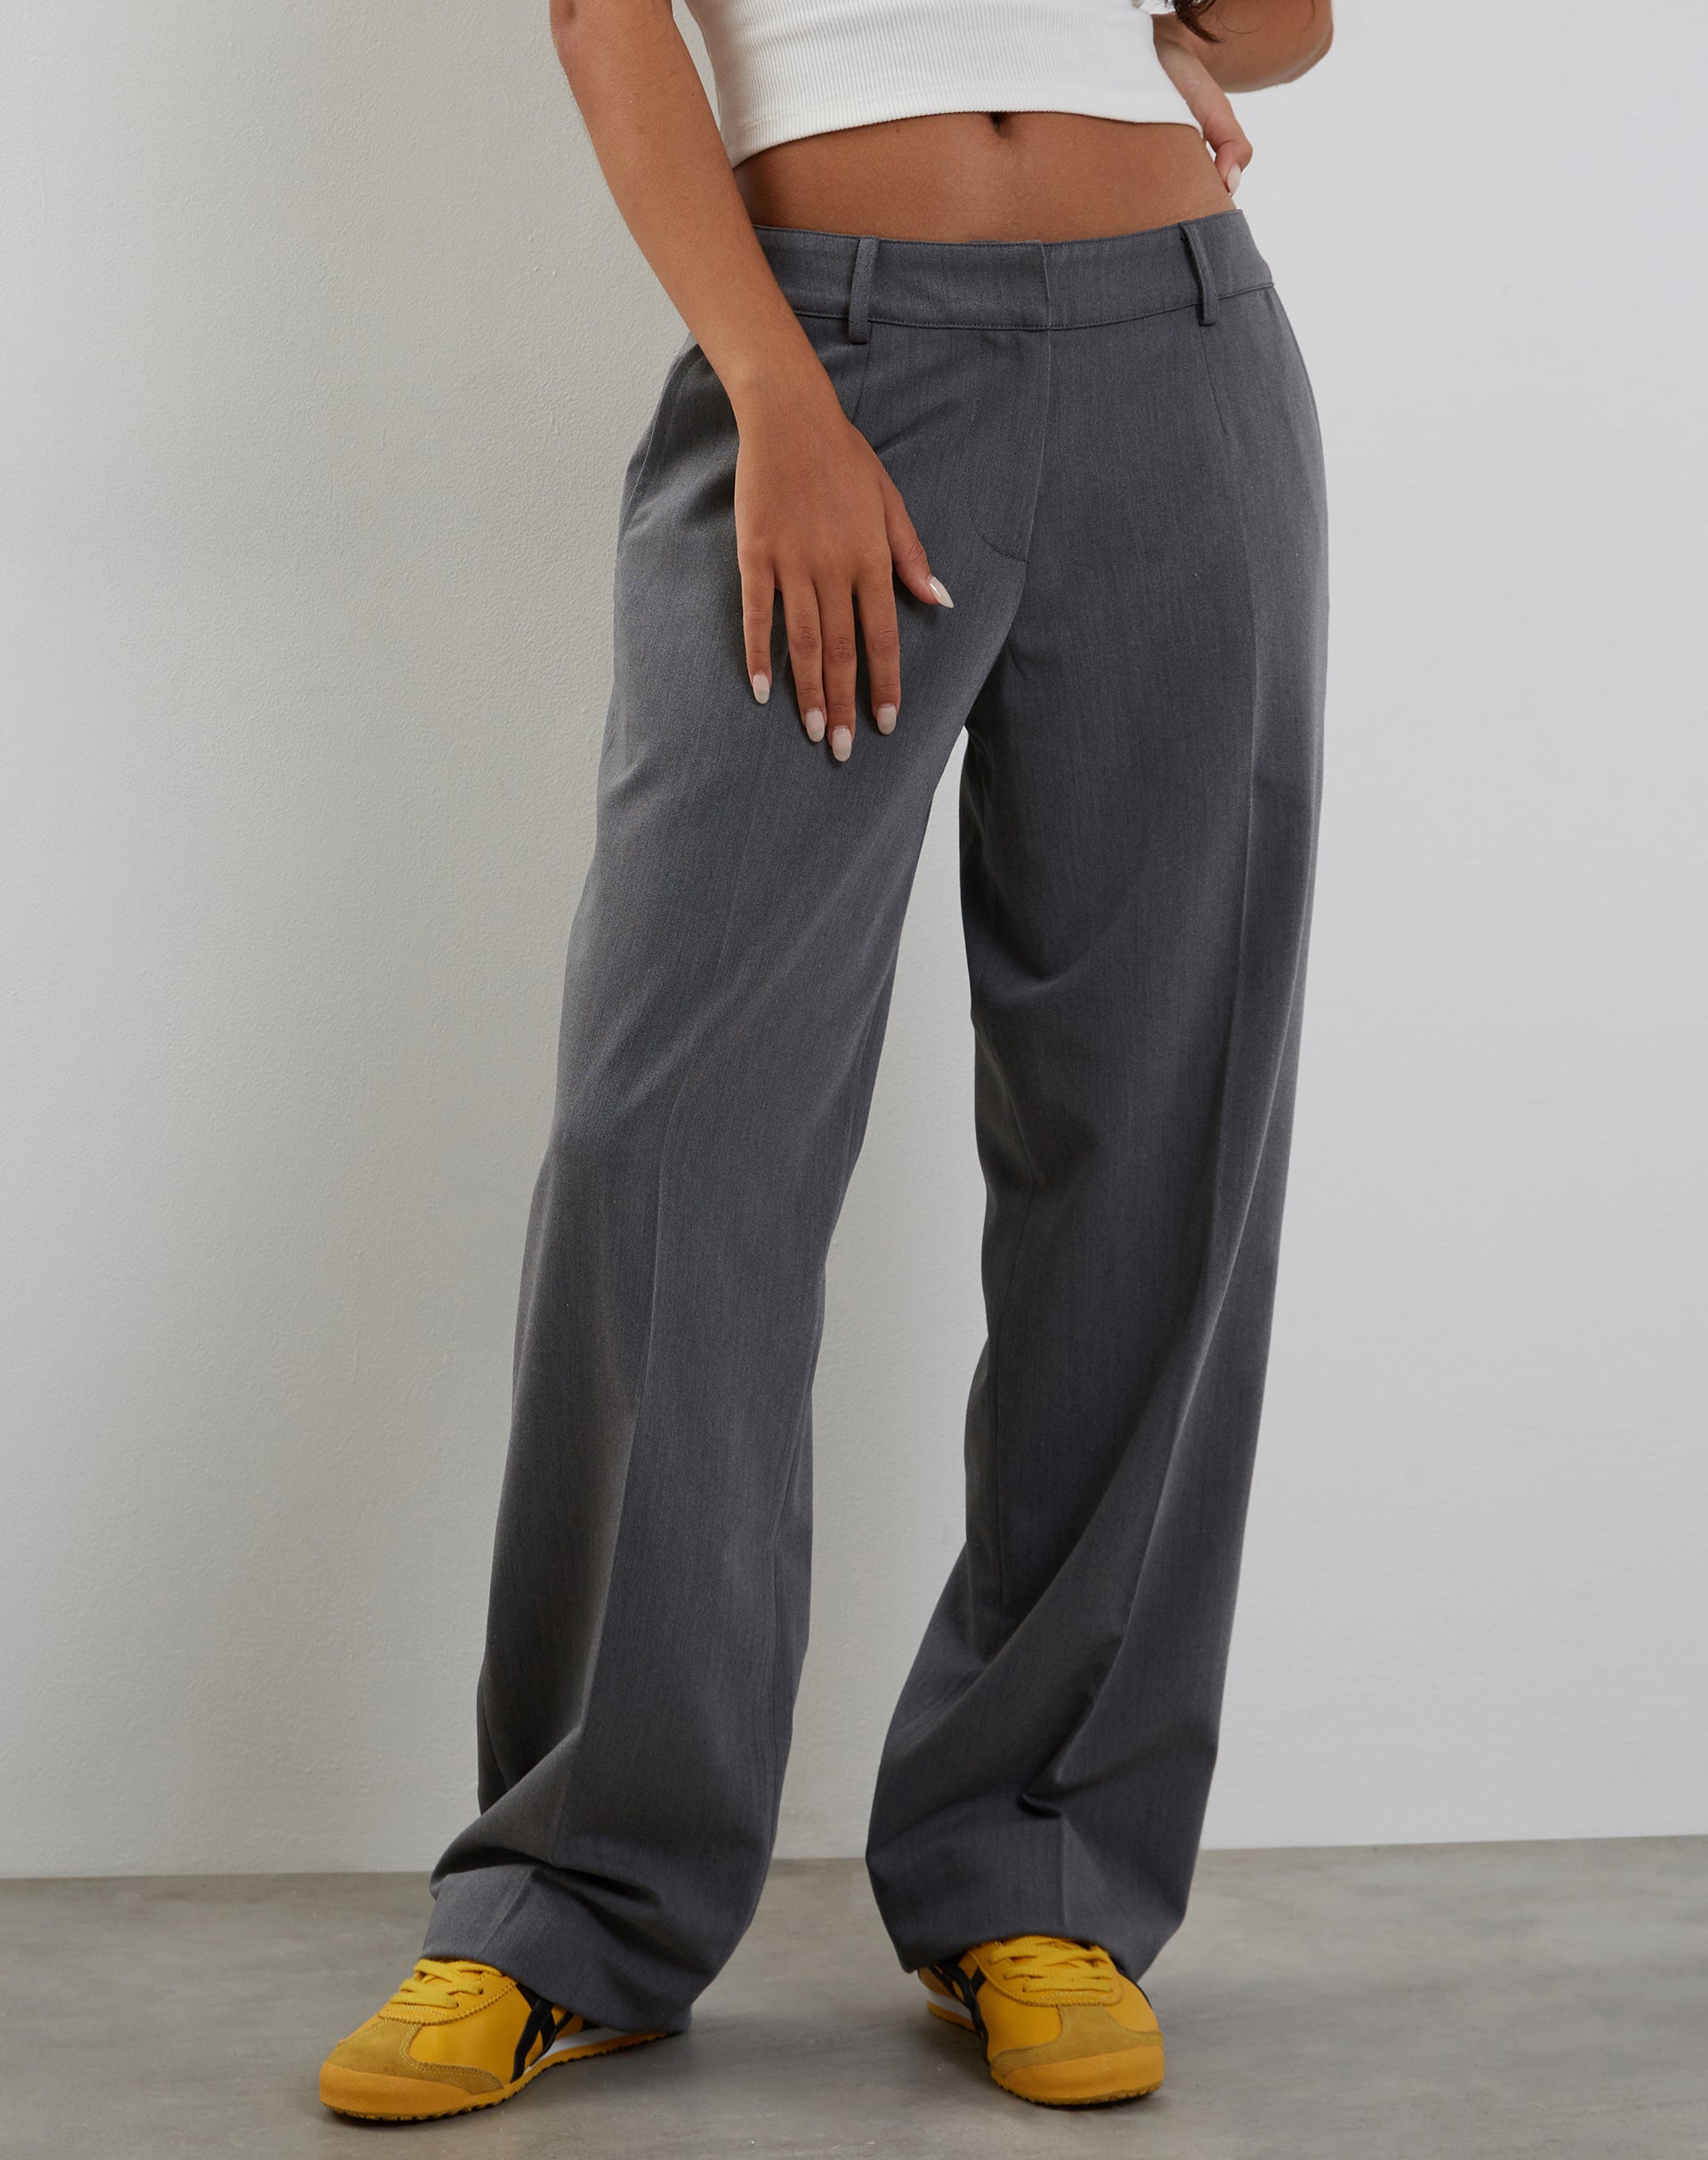 Sirkia Low Rise Tailored Trouser in Charcoal